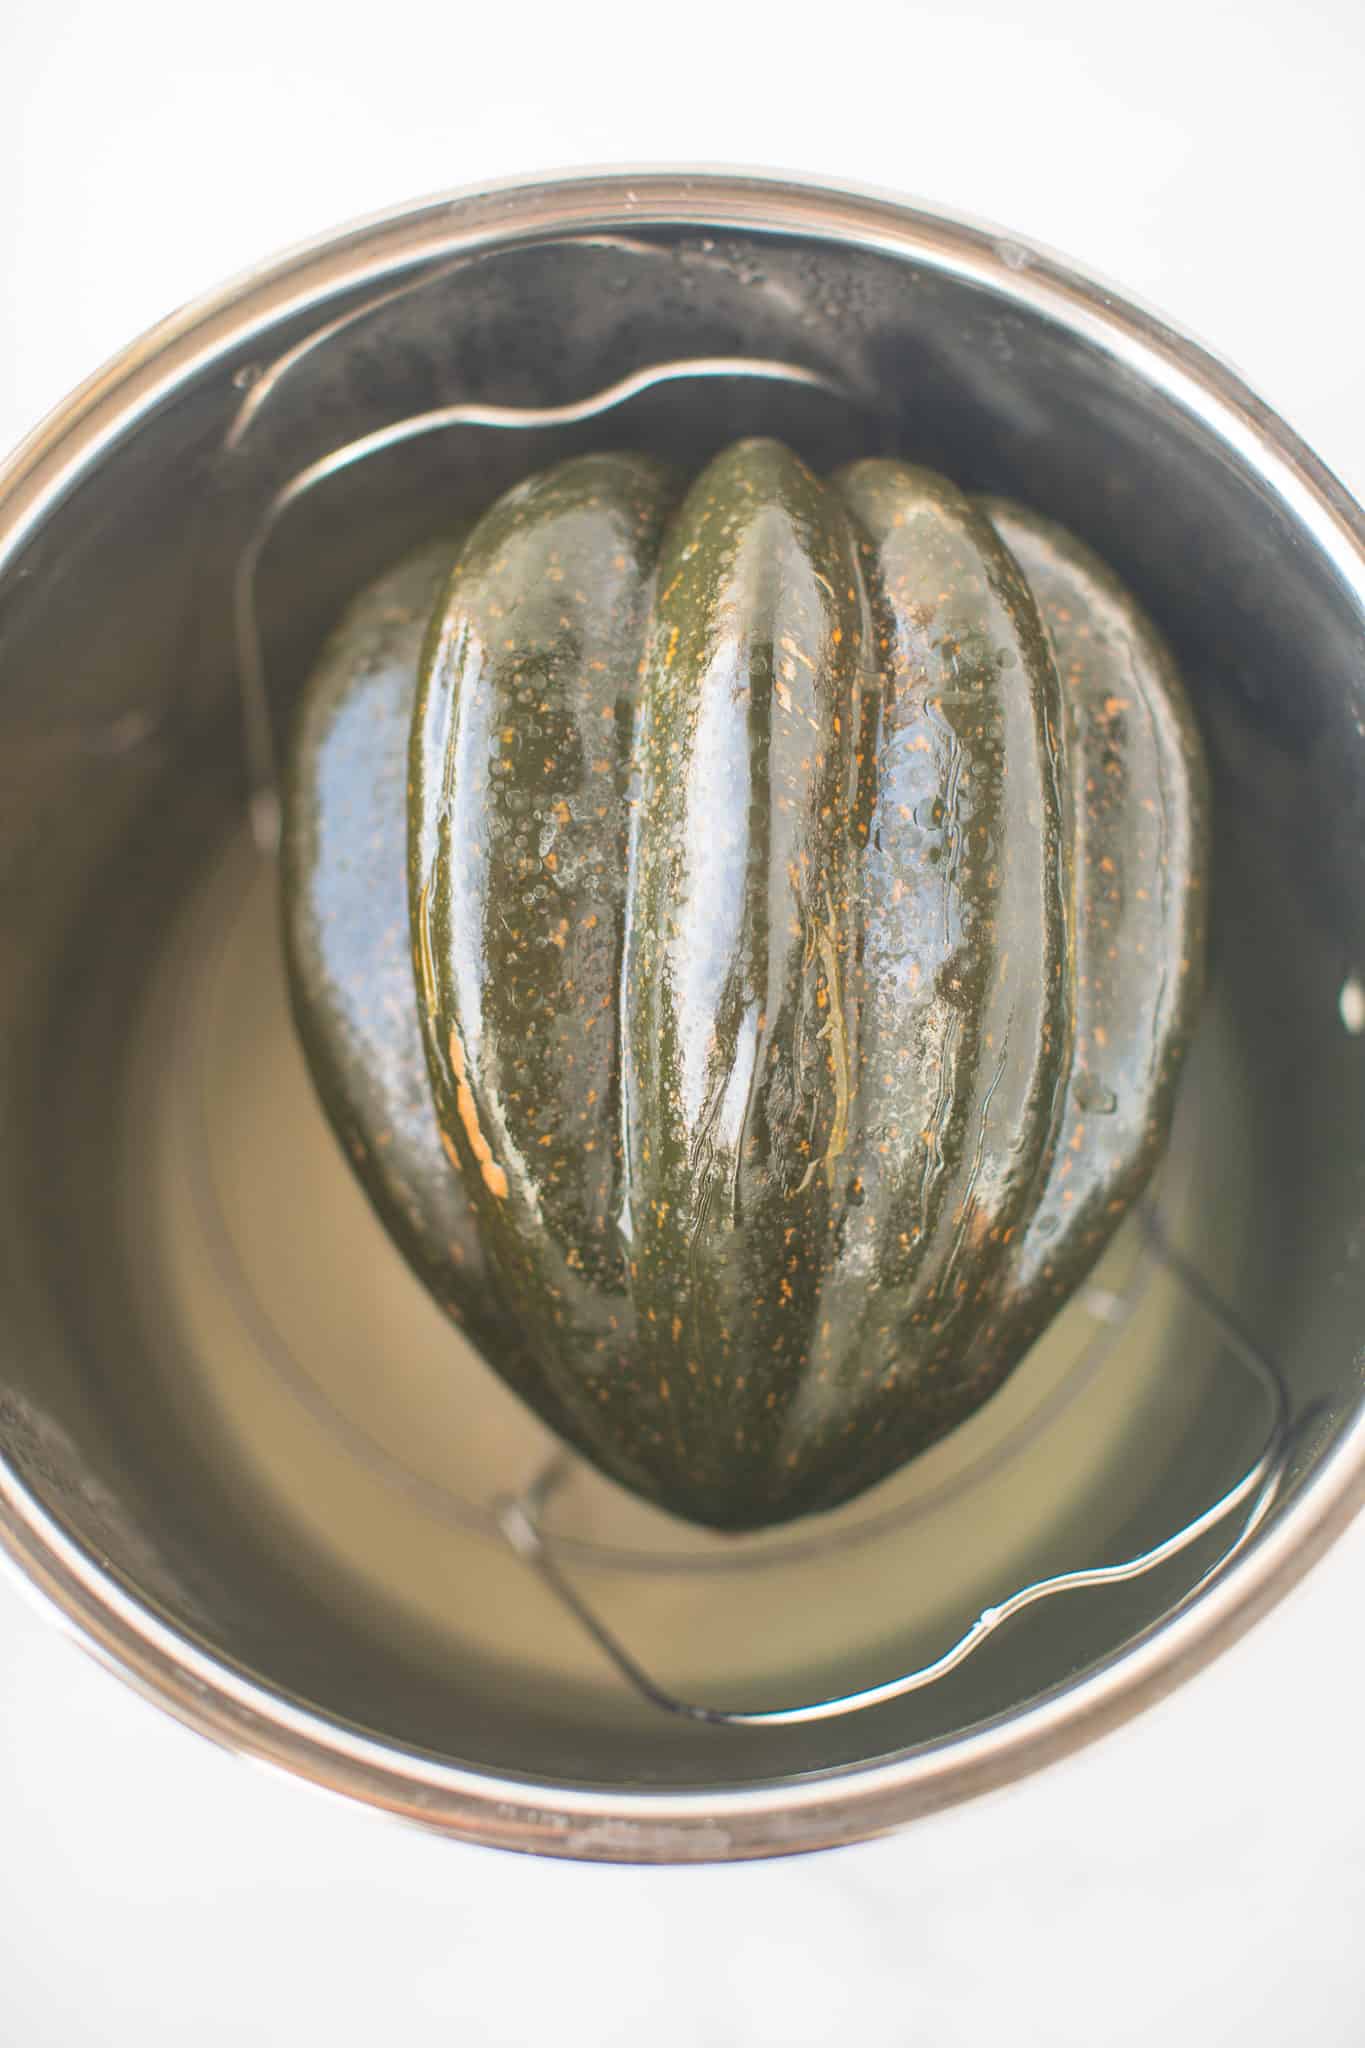 cooked whole acorn squash inside a pressure cooker.